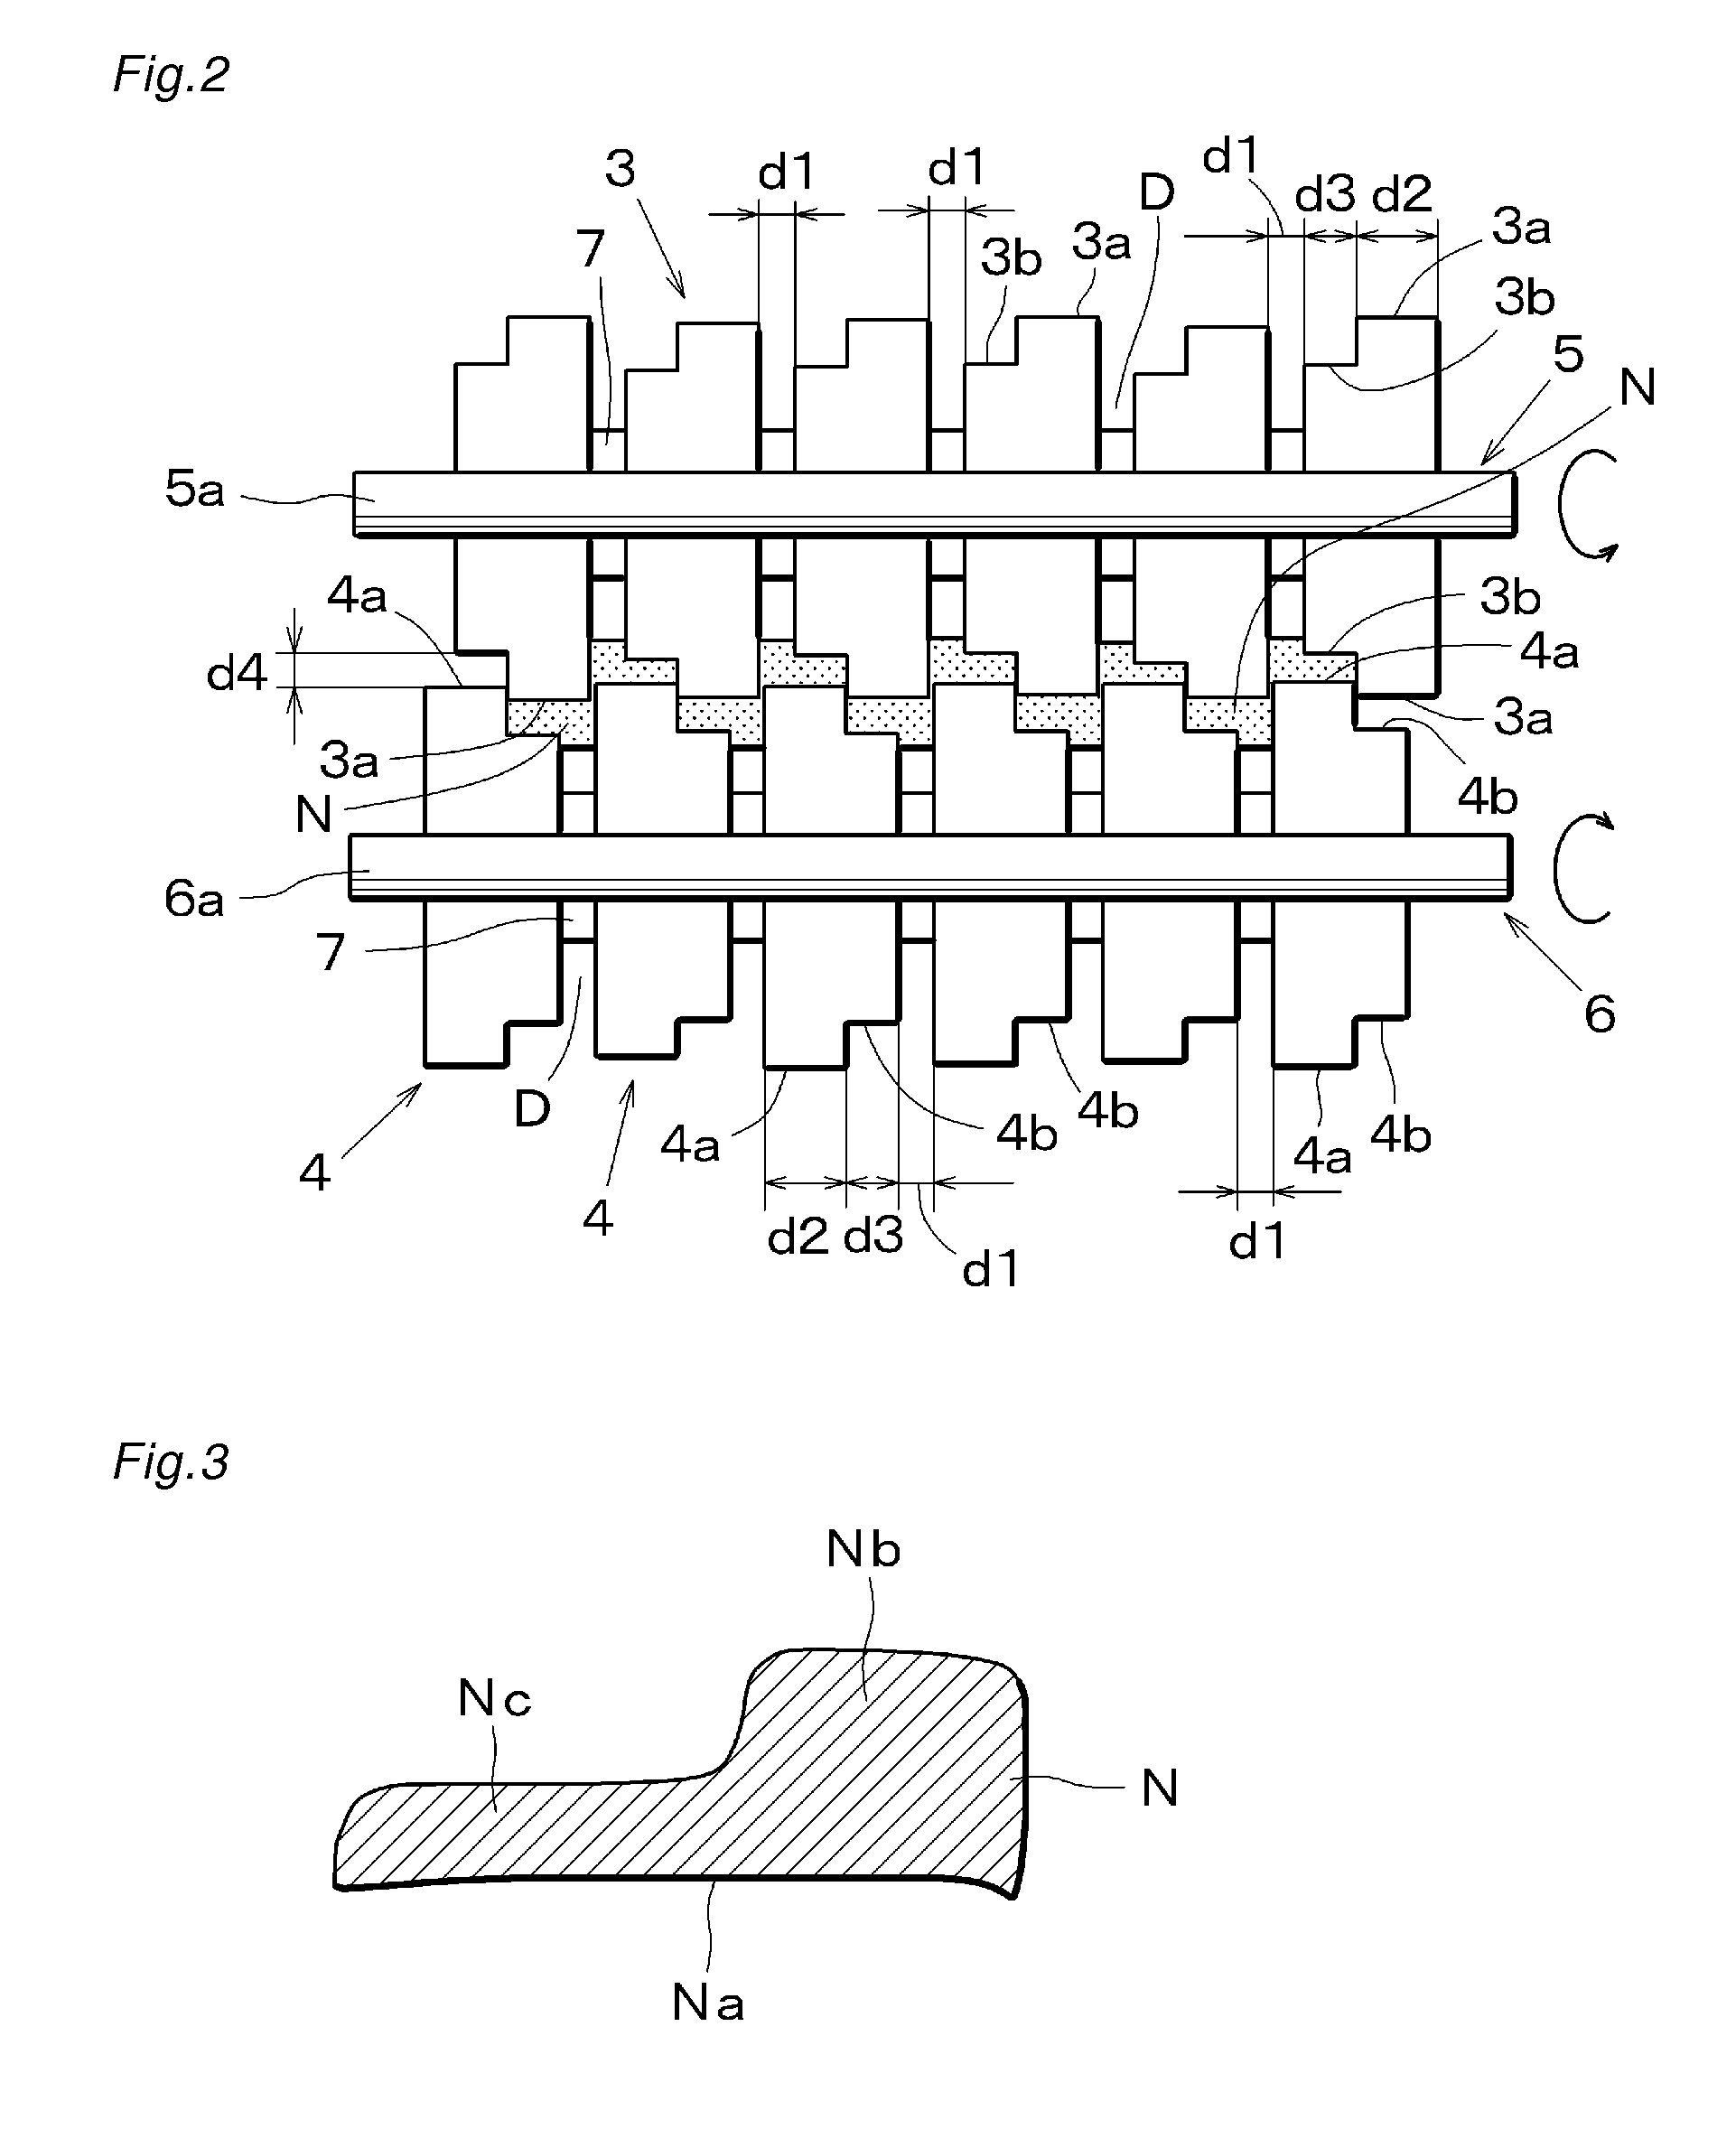 Noodles and apparatus for processing the same